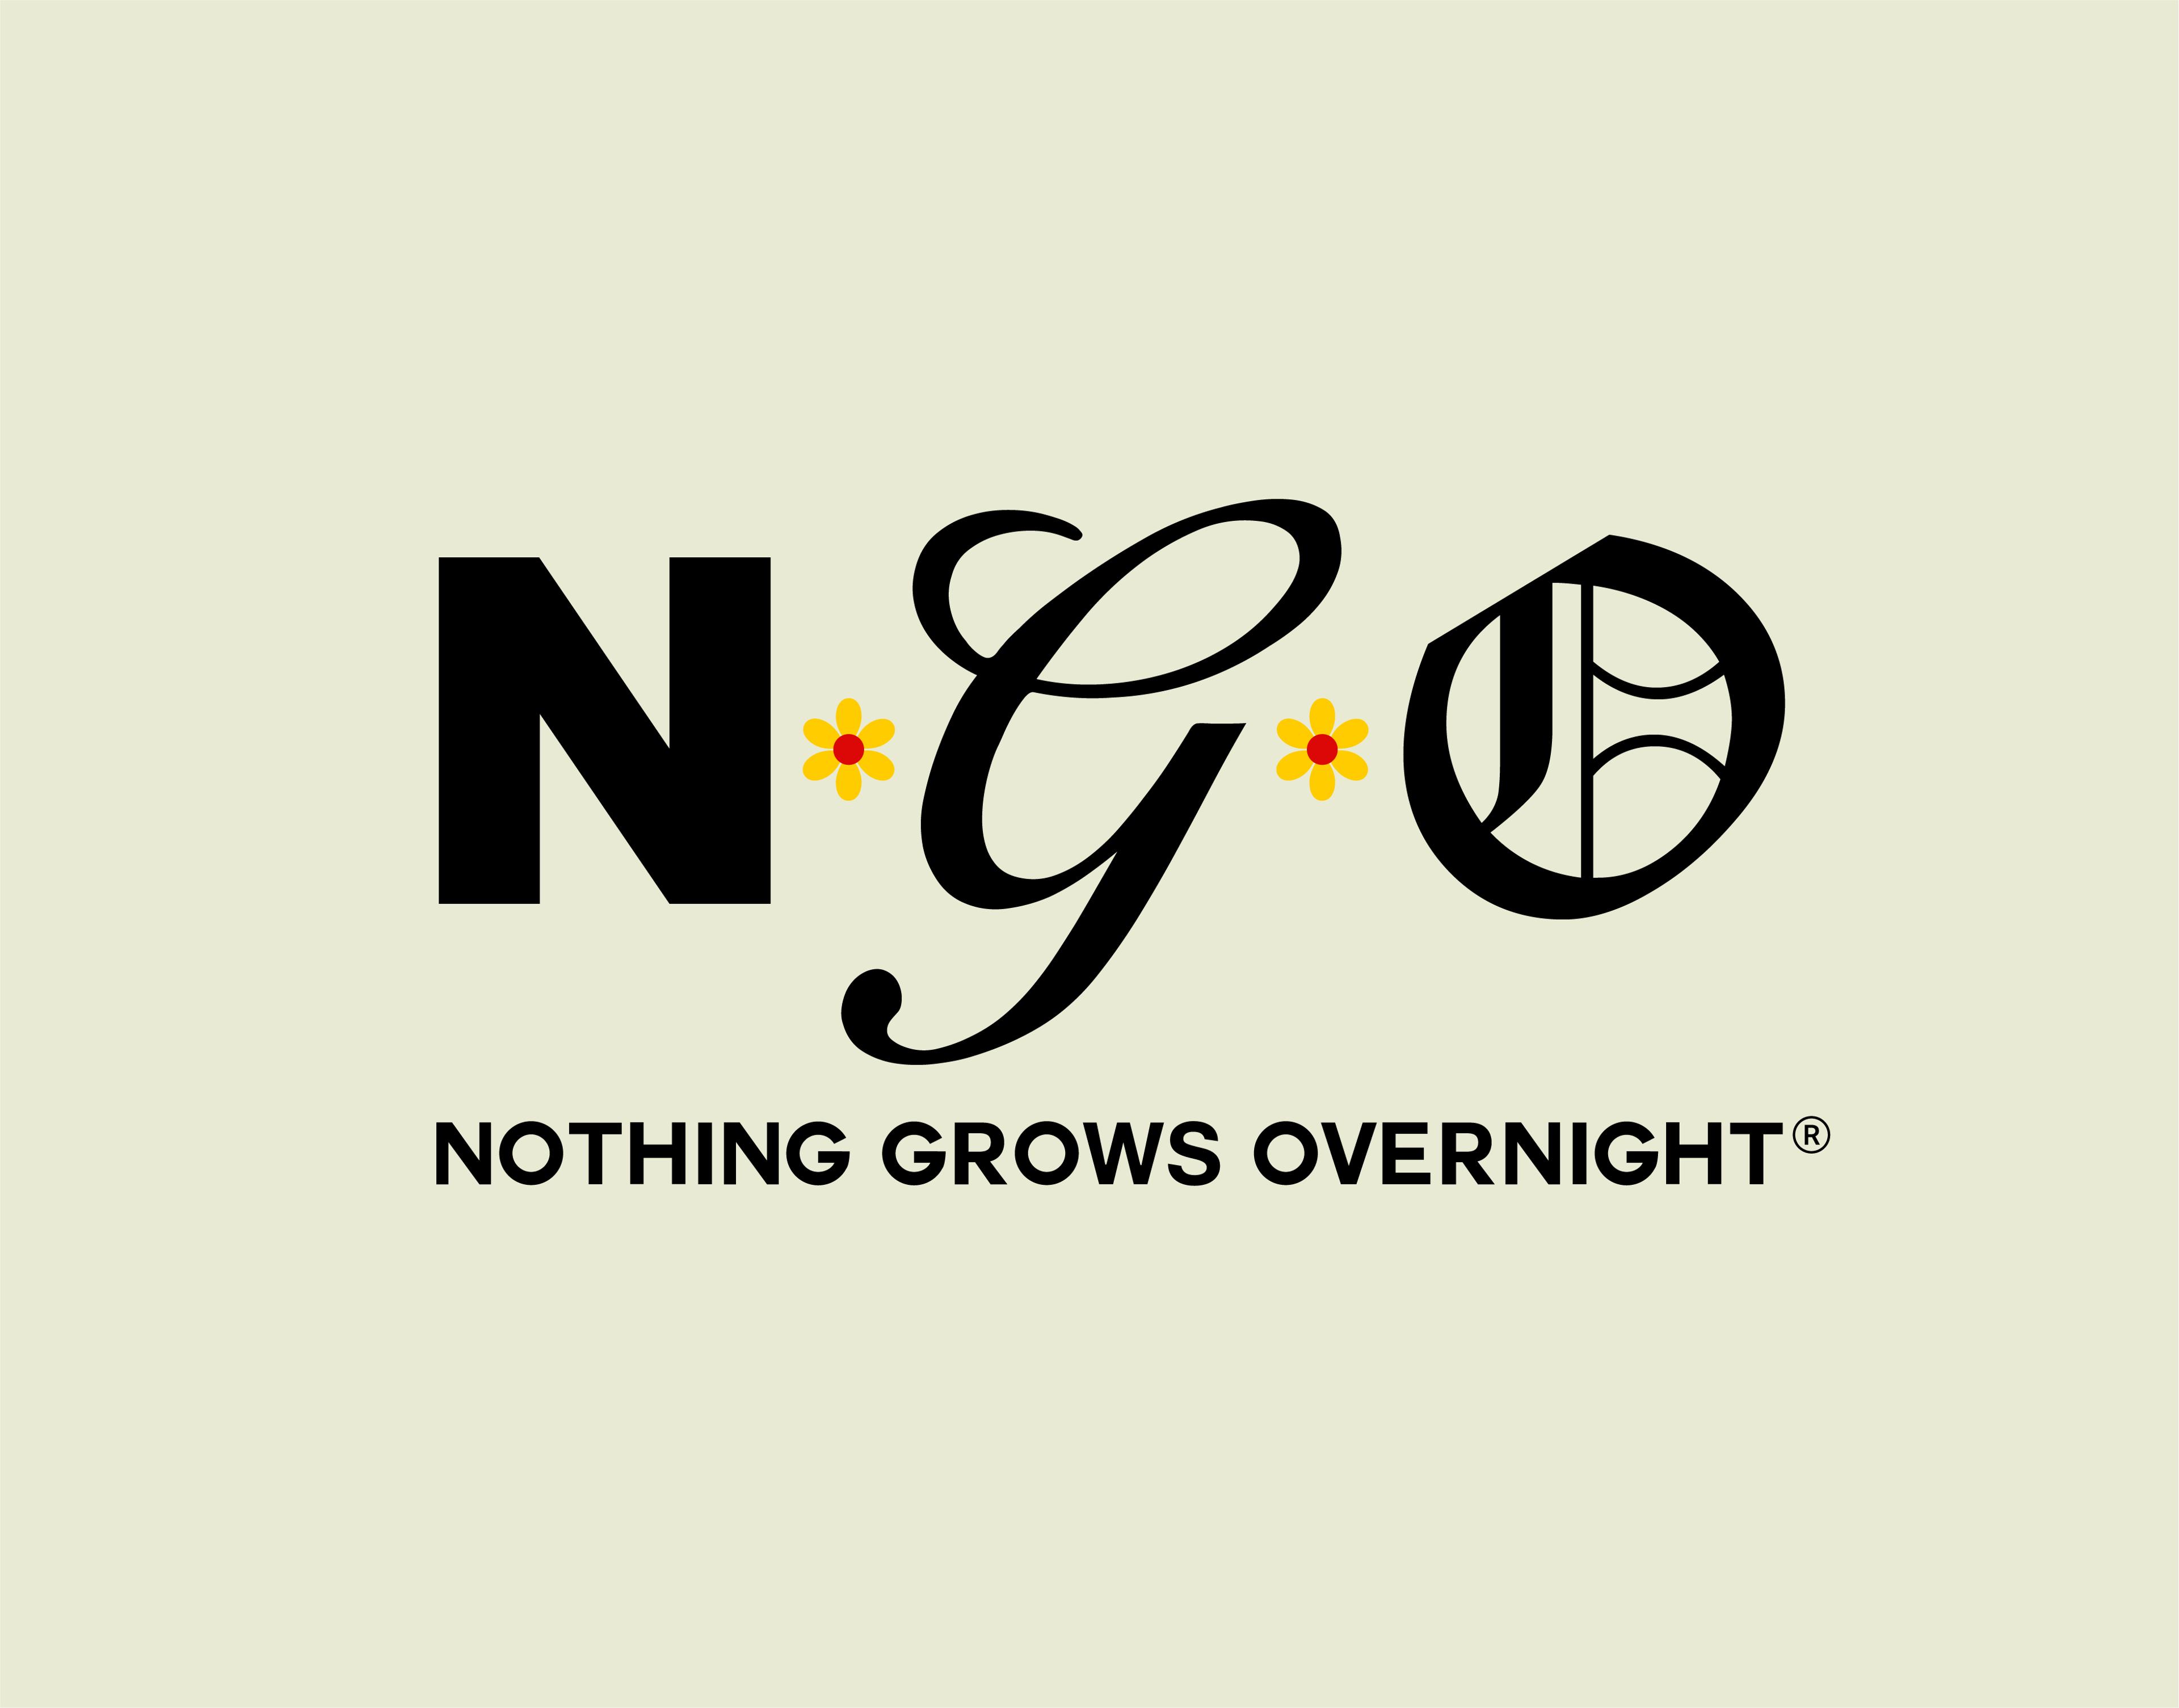 N⋆G⋆O - Nothing Grows Overnight